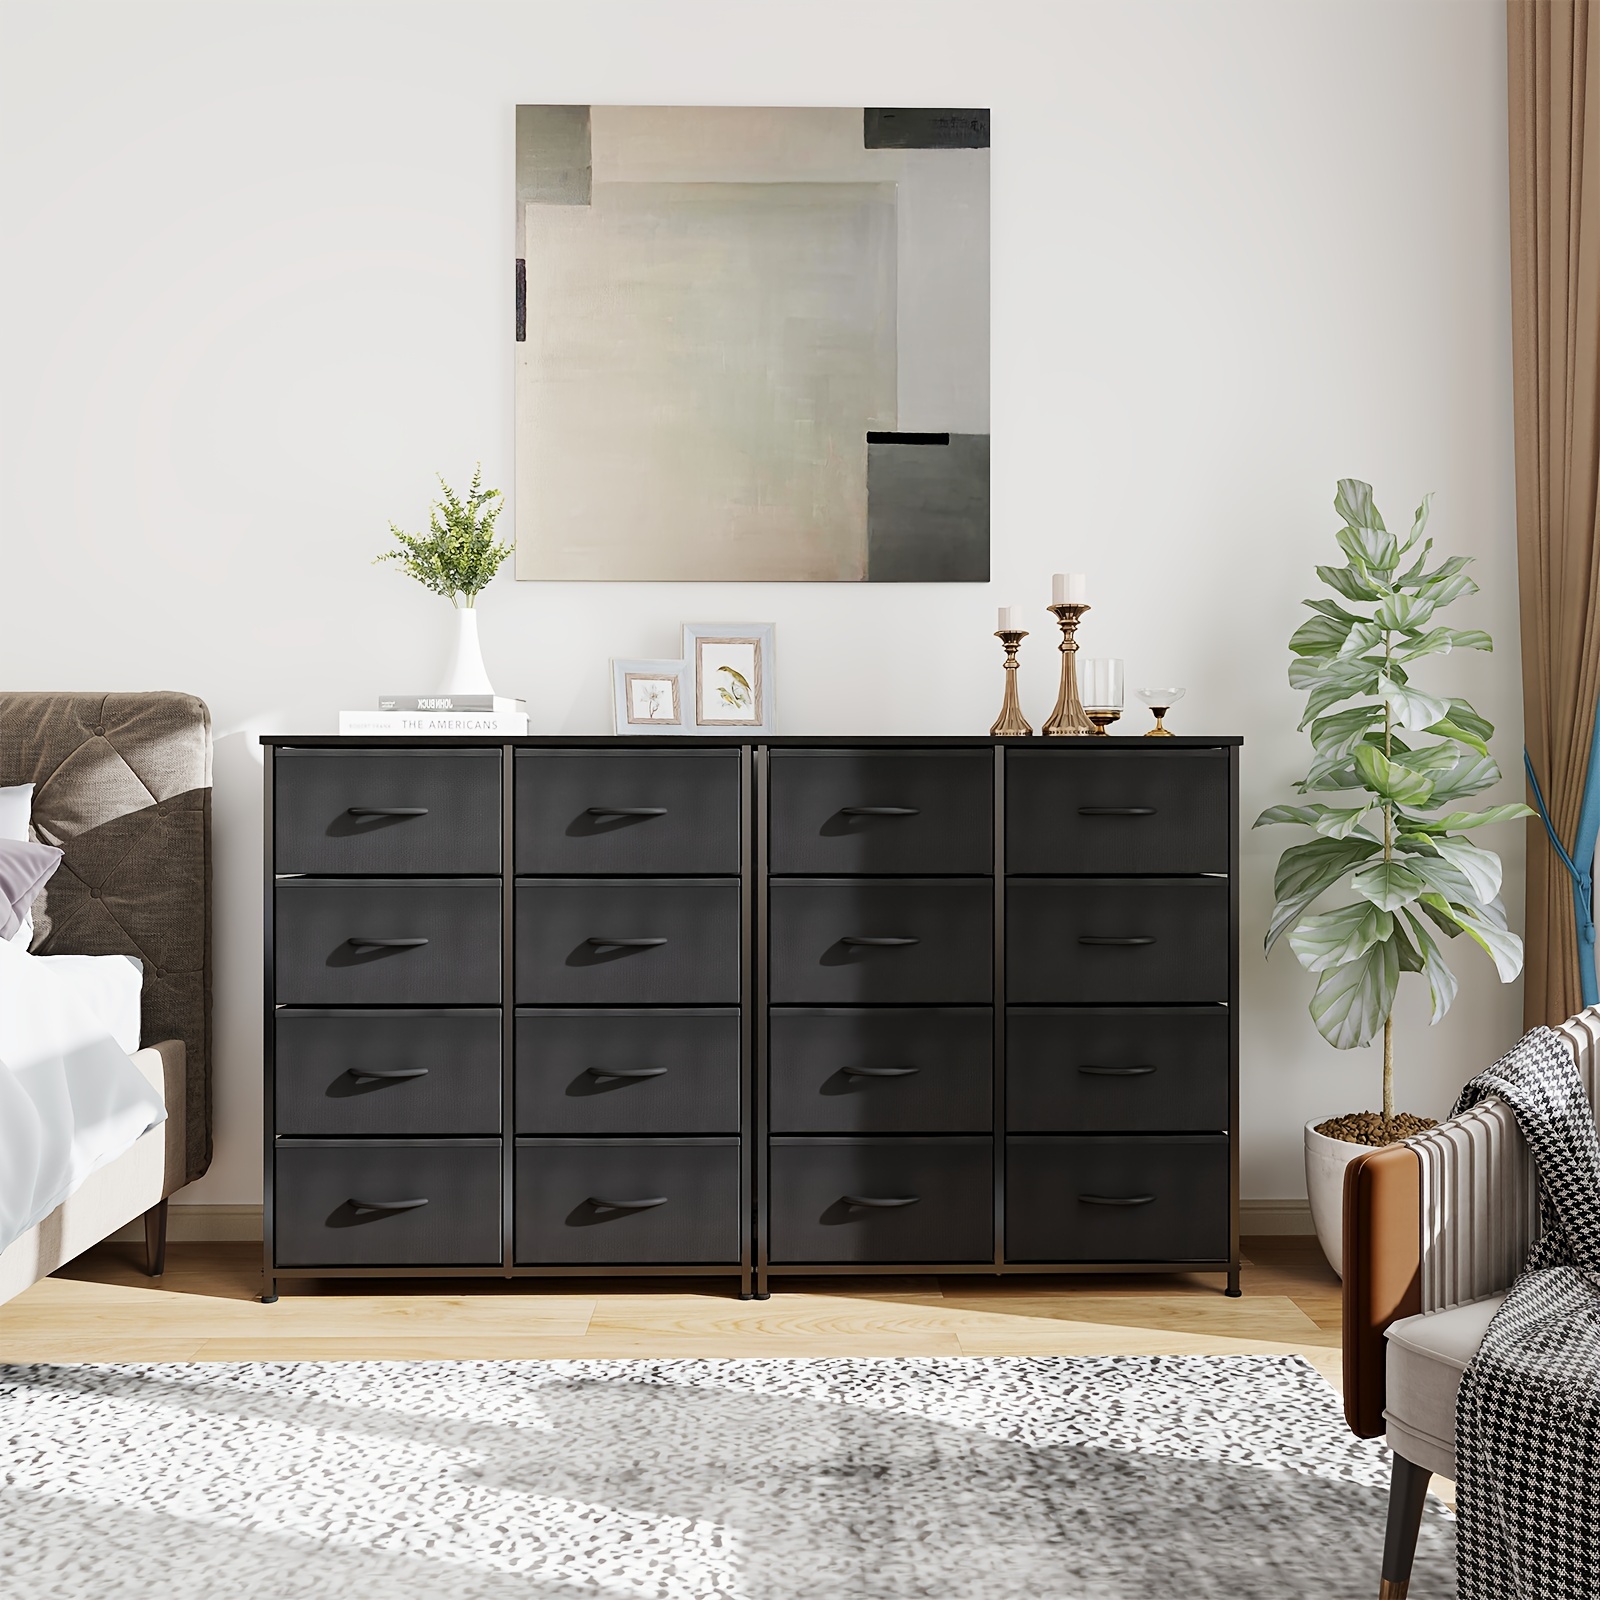 

2 Pack Dresser For Bedroom With Metal Frame Available Adustale Foot Height, Can Install On The Floor Or Fixed To The Wall, Indoor Use, Lightweight, Total 16 Drawers